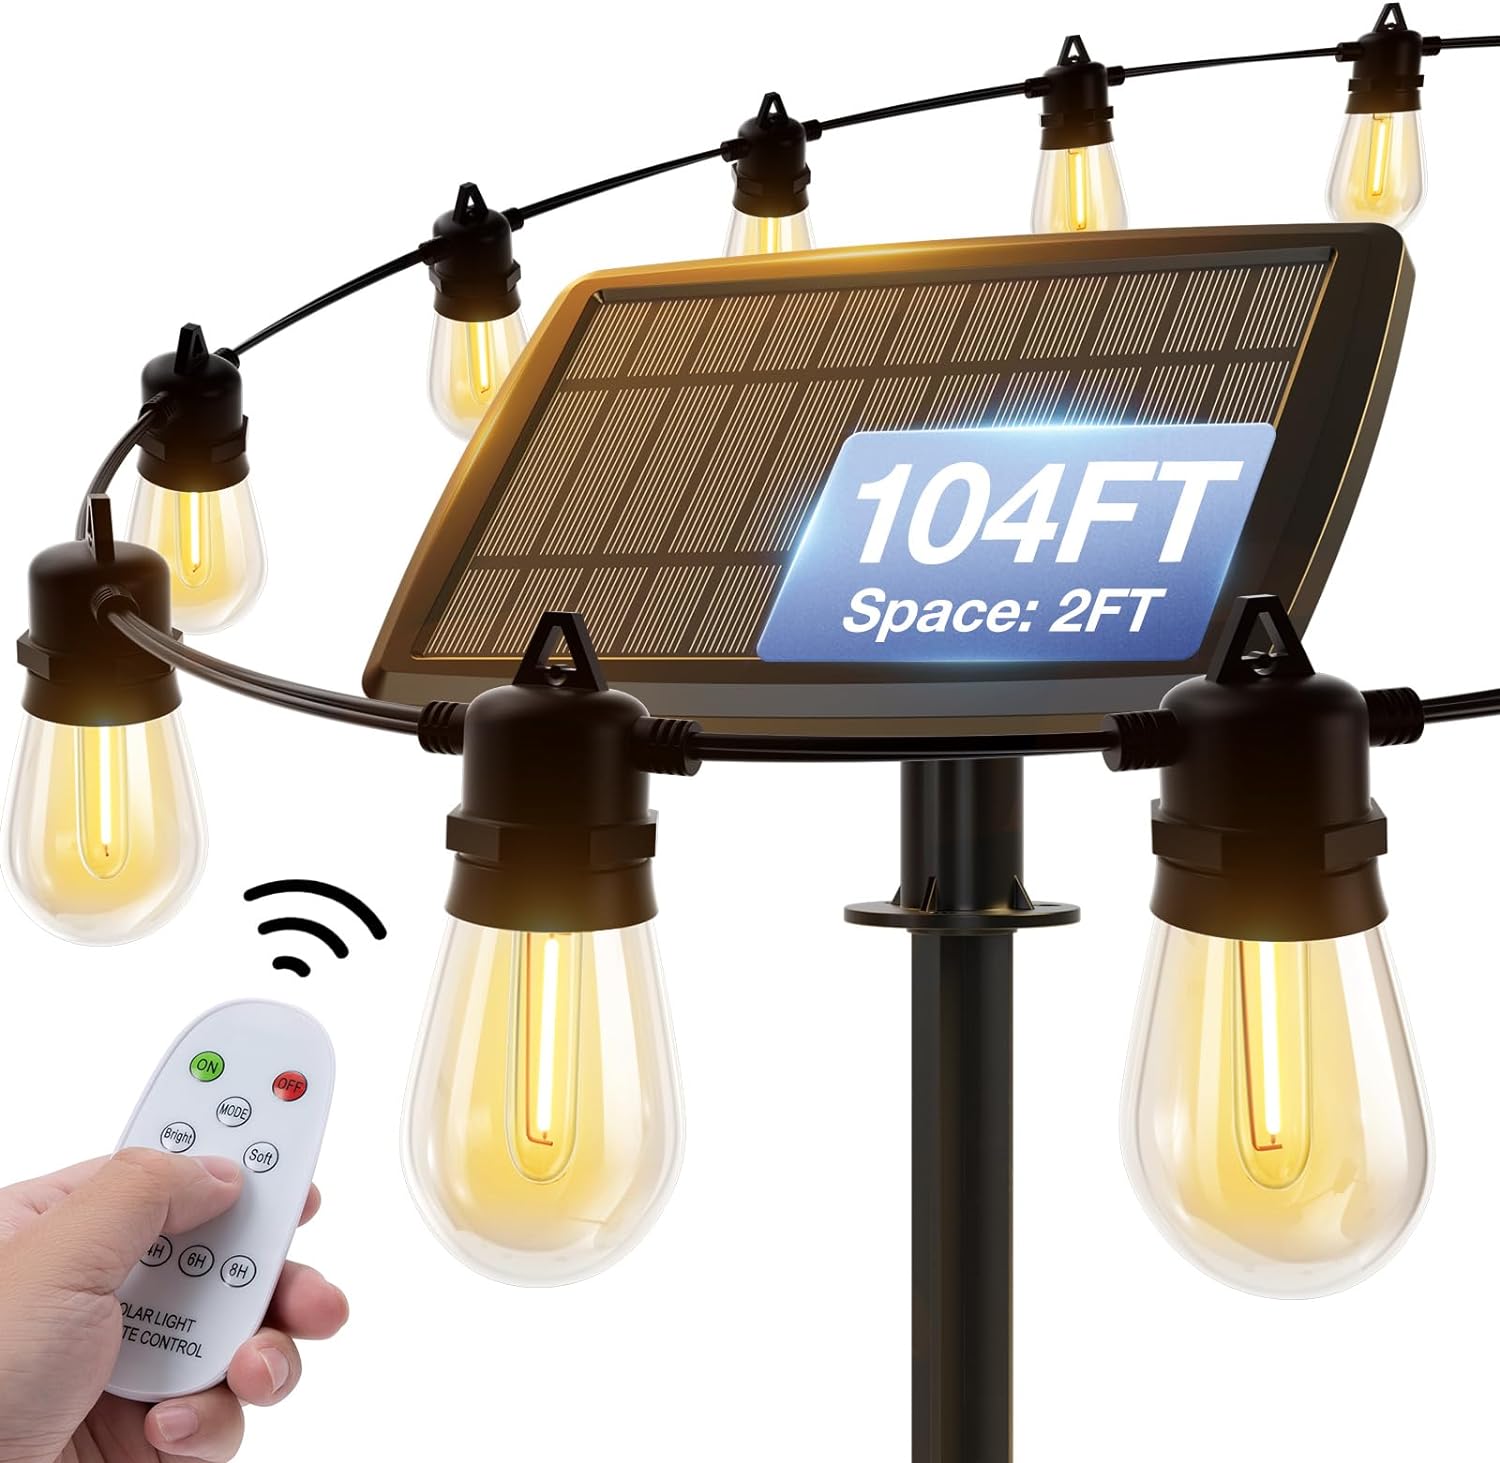 I keep my backyard light up at night with these. Solar charging is the best part, it charges all day and is on all night plus looks cool at night so definitely a 5 star product.